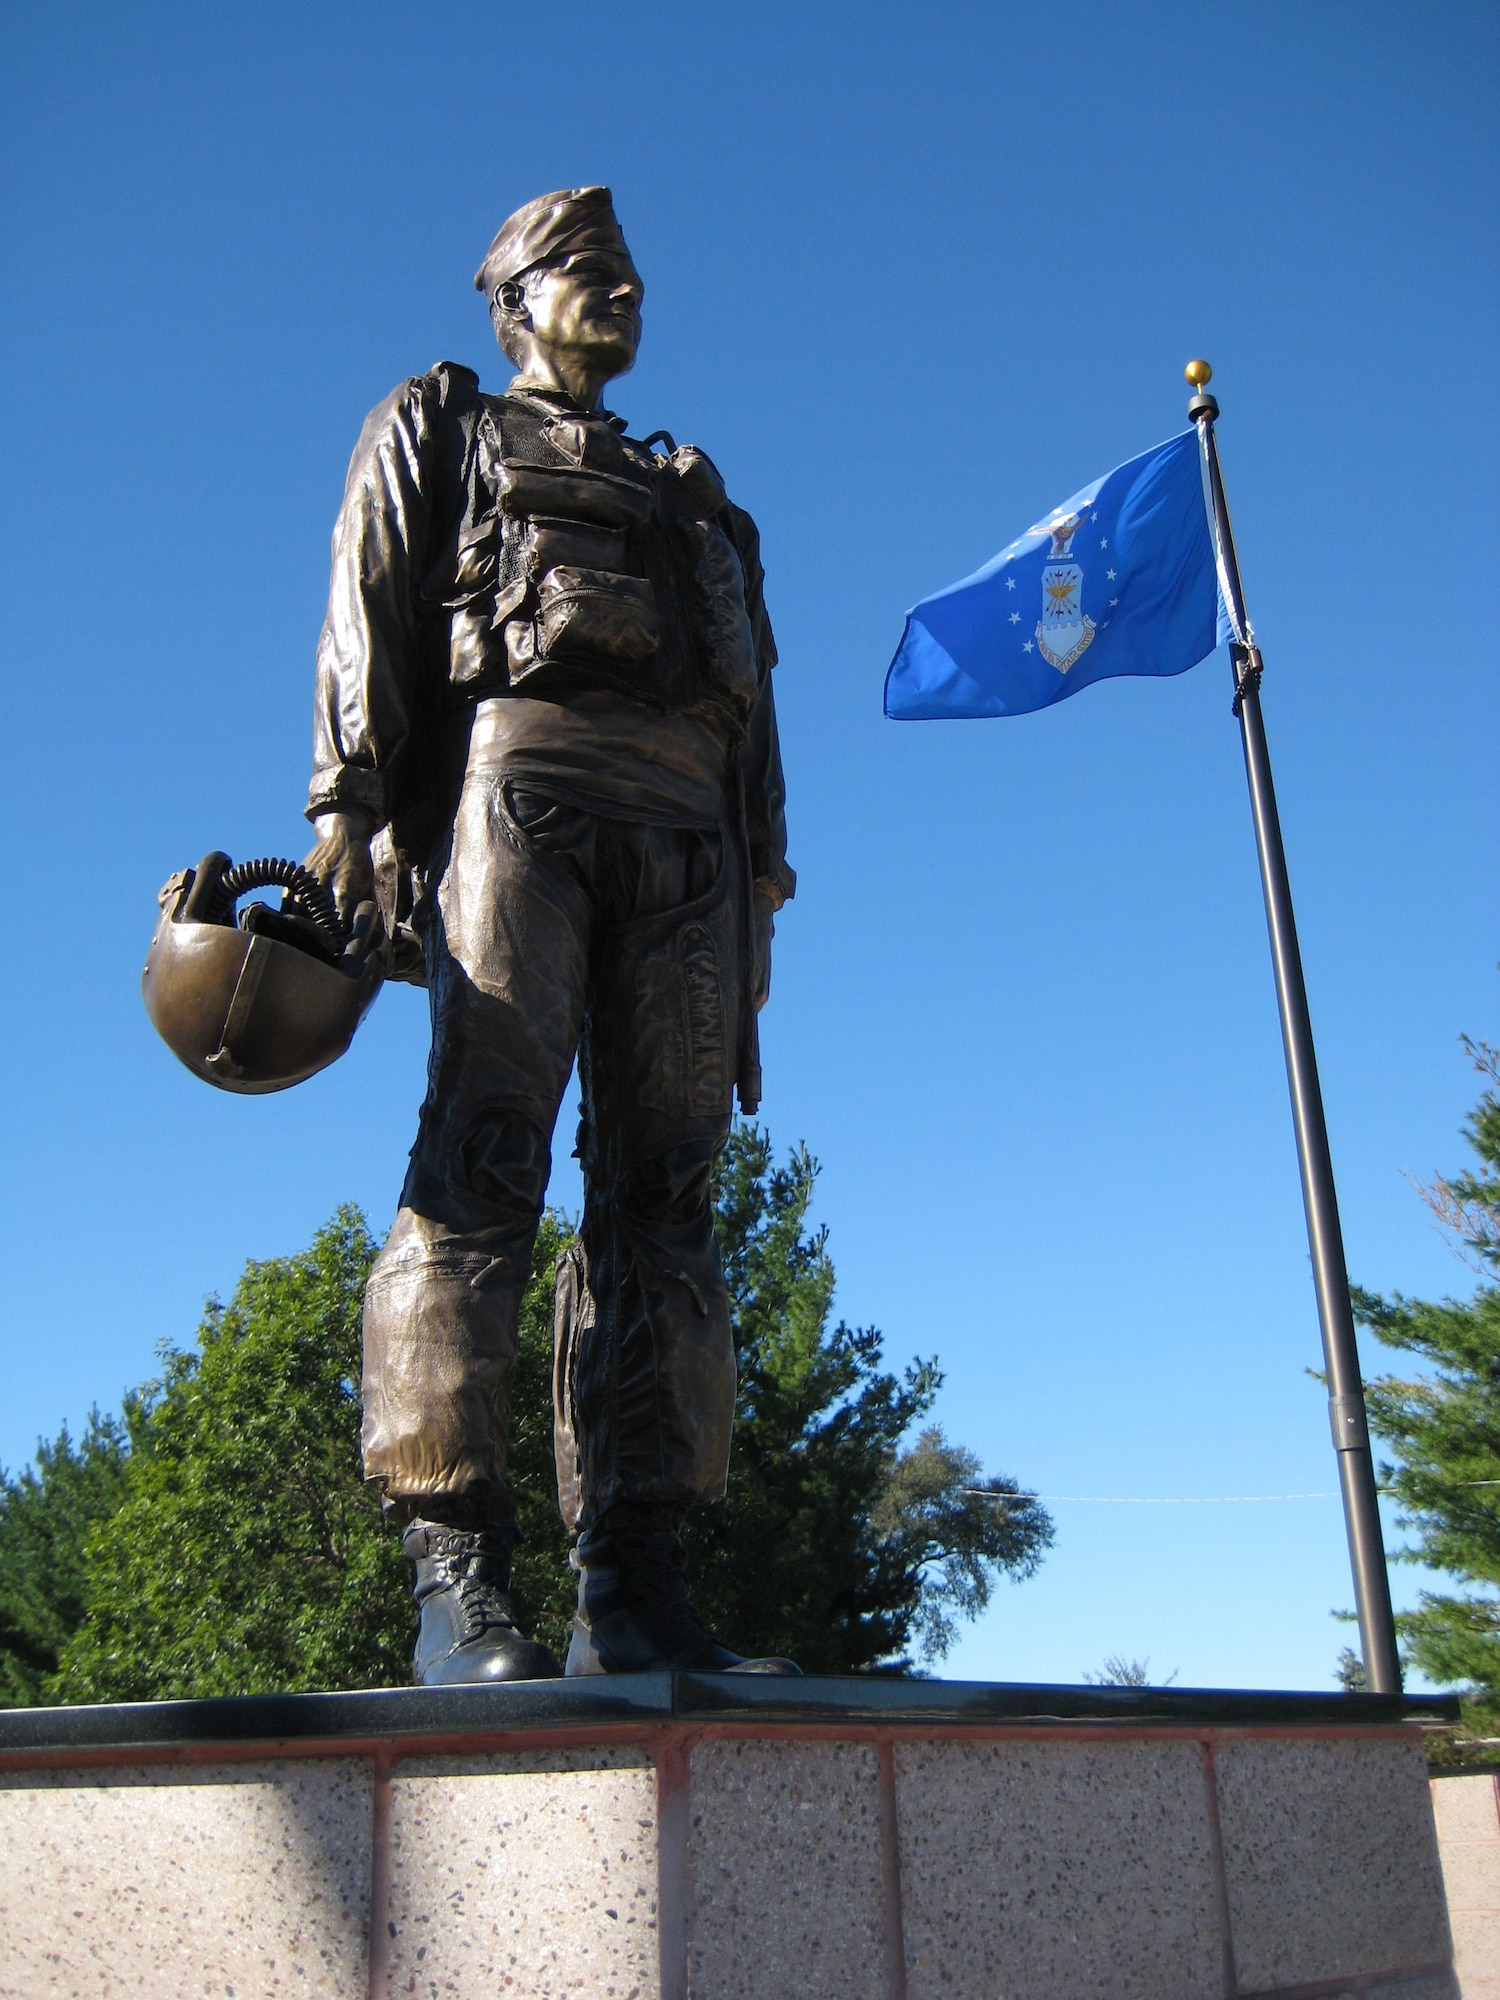 A bronze statue of retired Col. James H. Kasler, a decorated war hero and prisoner during the Vietnam War, was unveiled during a veteran's memorial dedication in Momence, Ill., Sept. 15, 2007. Colonel Kasler is the only Airman to be awarded three Air Force Crosses. (U.S. Air Force photo/1st Lt. Dustin Doyle)